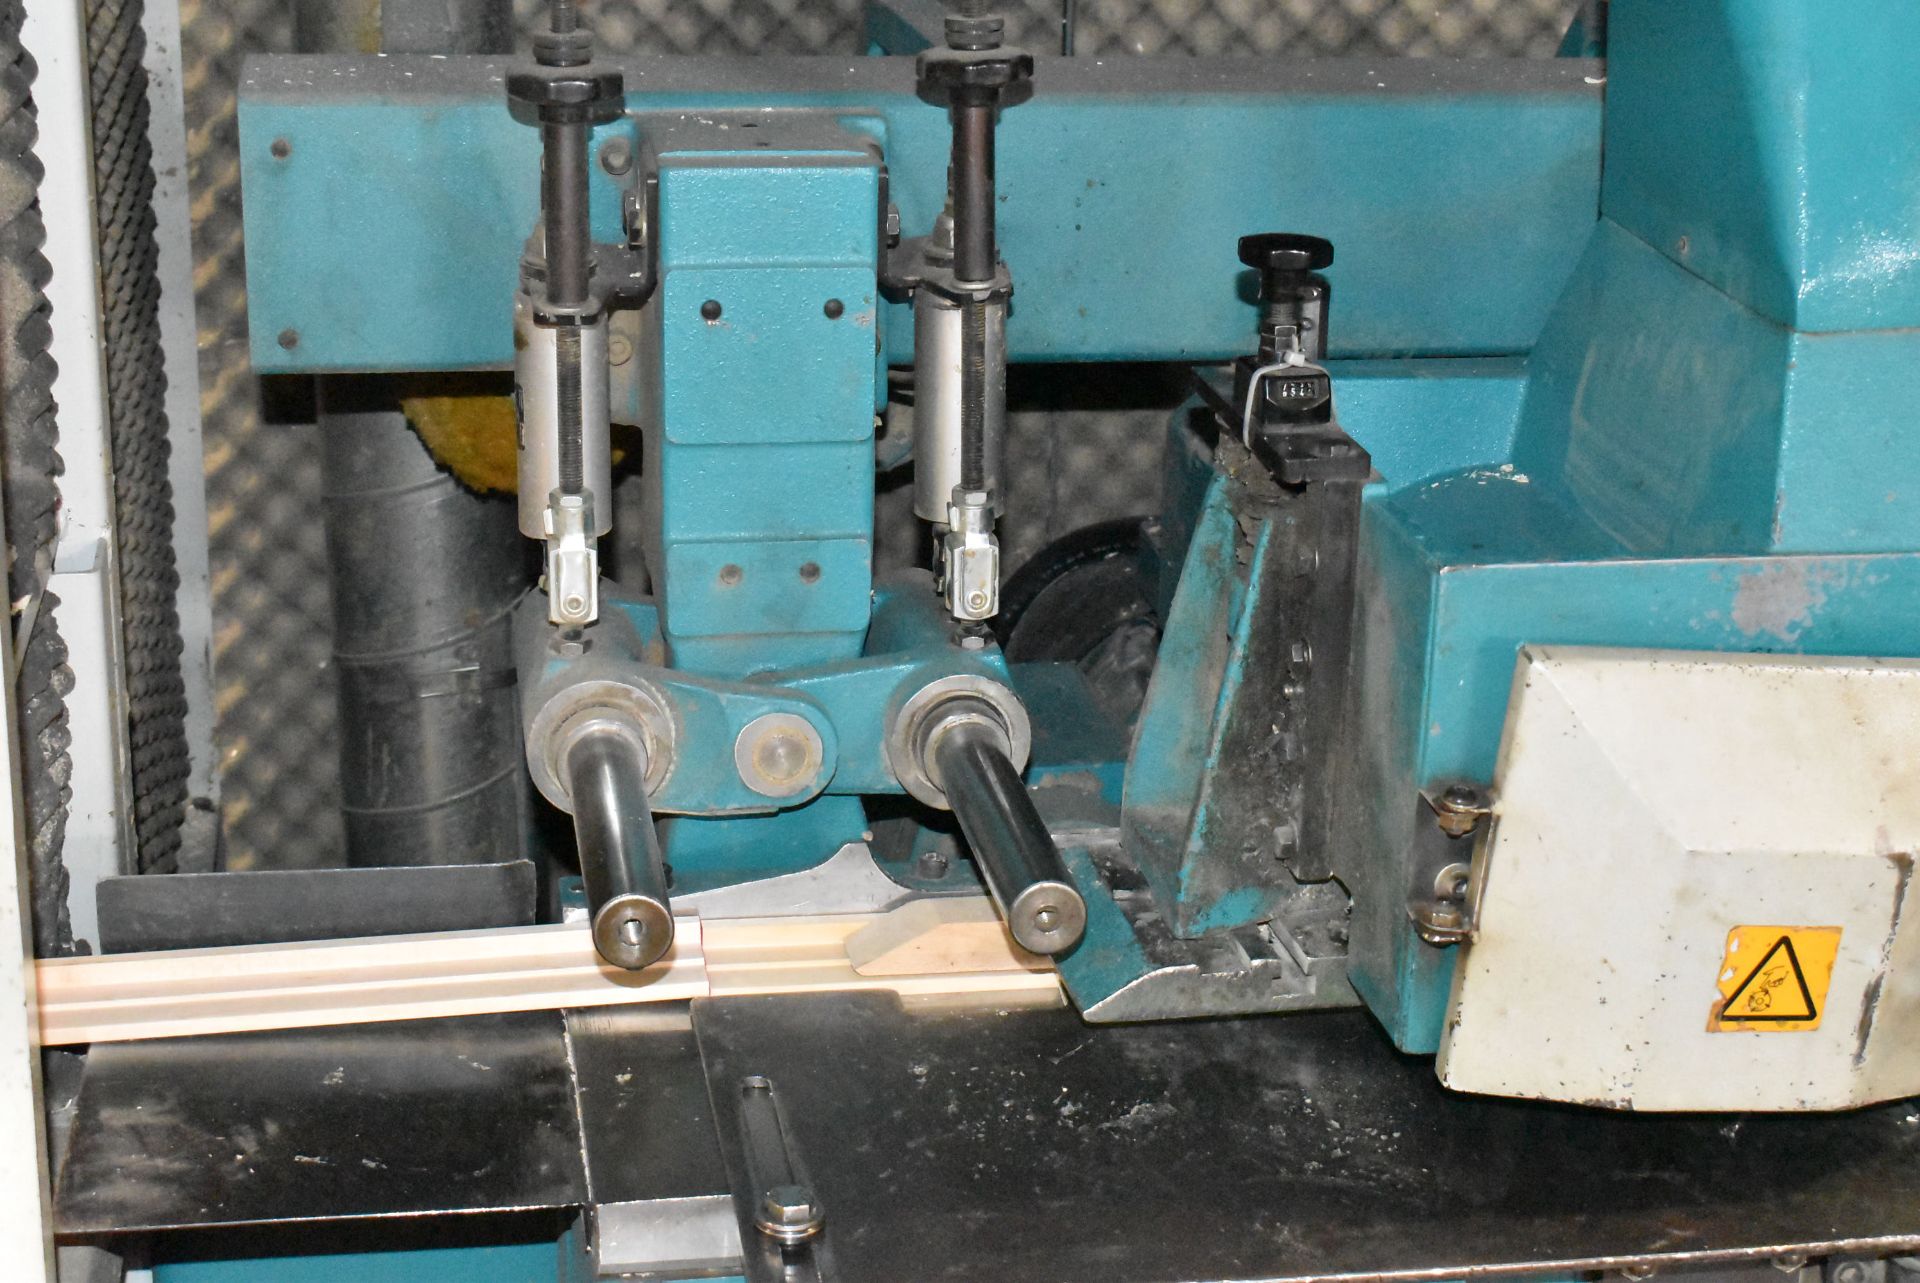 WADKIN GA220/5 MOULDER WITH 9.06" X 5.12" MAX. WORKPIECE DIMENSIONS, 6,000 RPM CUTTERBLOCK SPINDLES, - Image 5 of 10